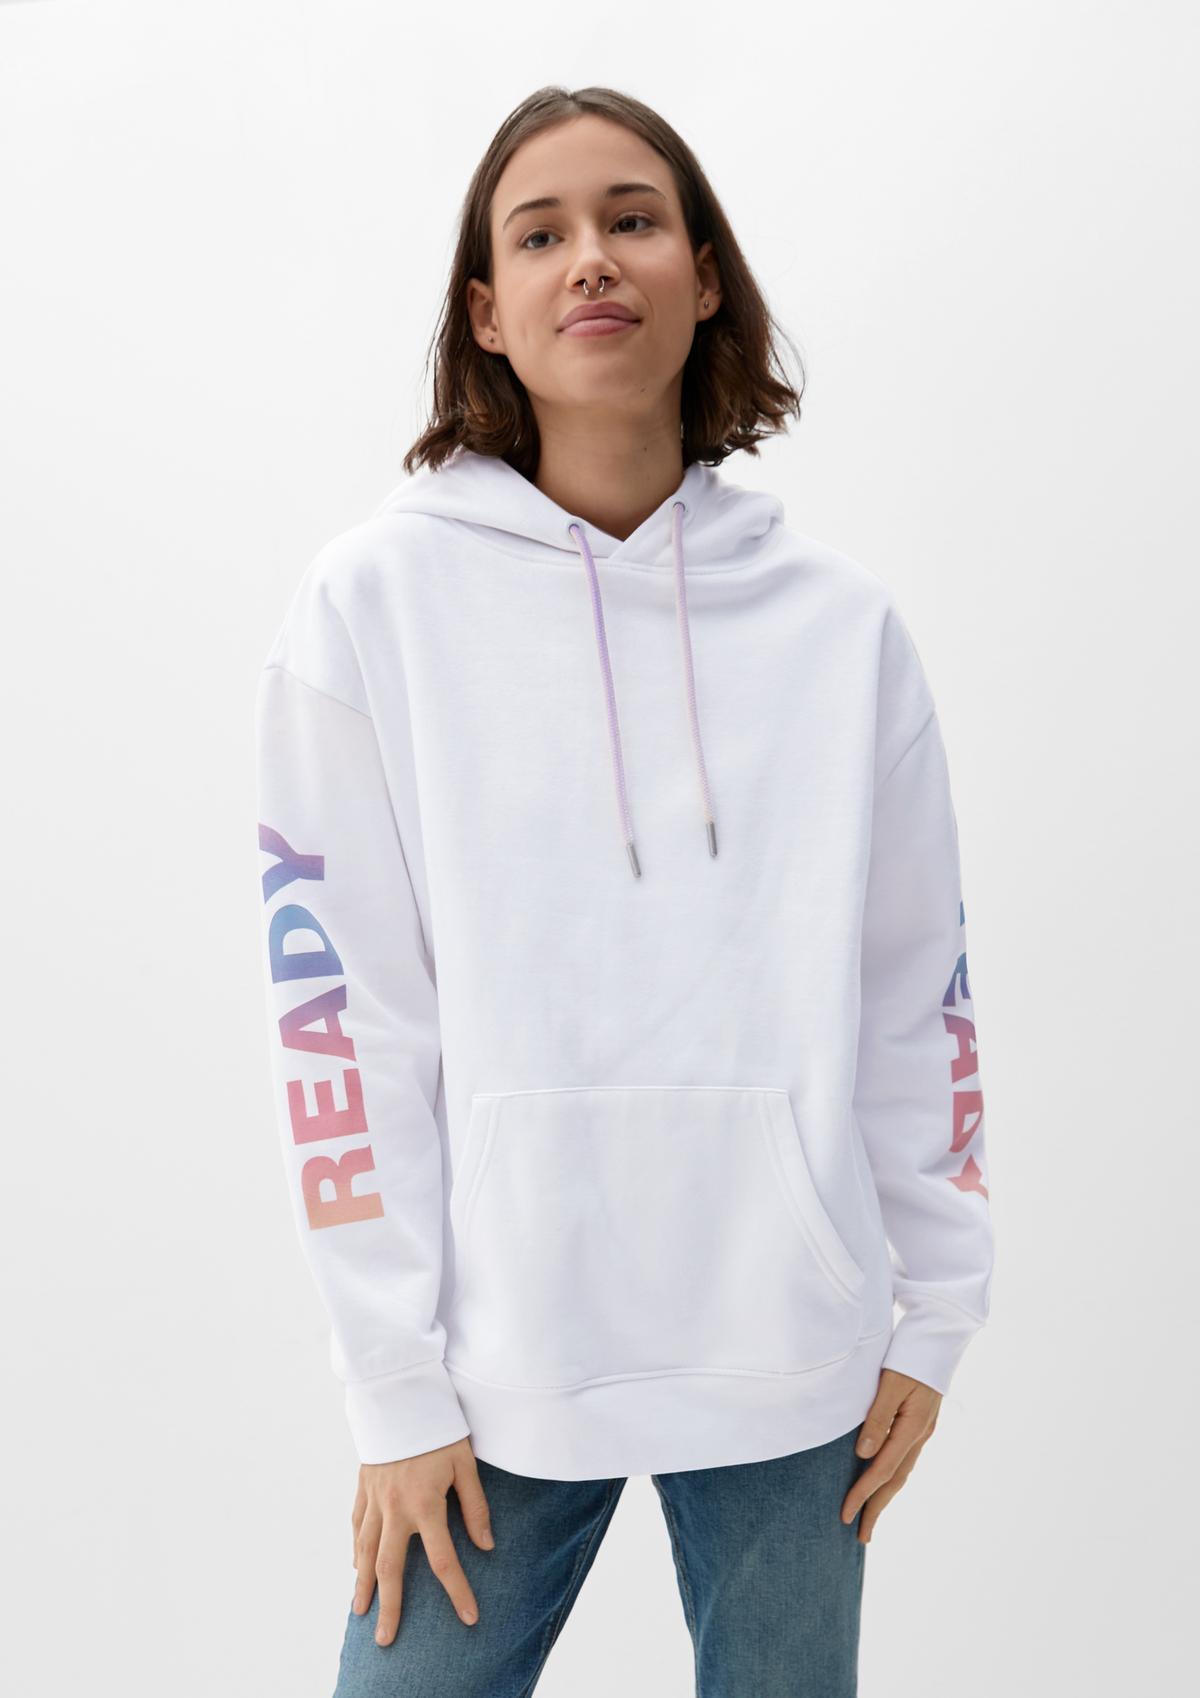 Hooded sweatshirt with a back white - print